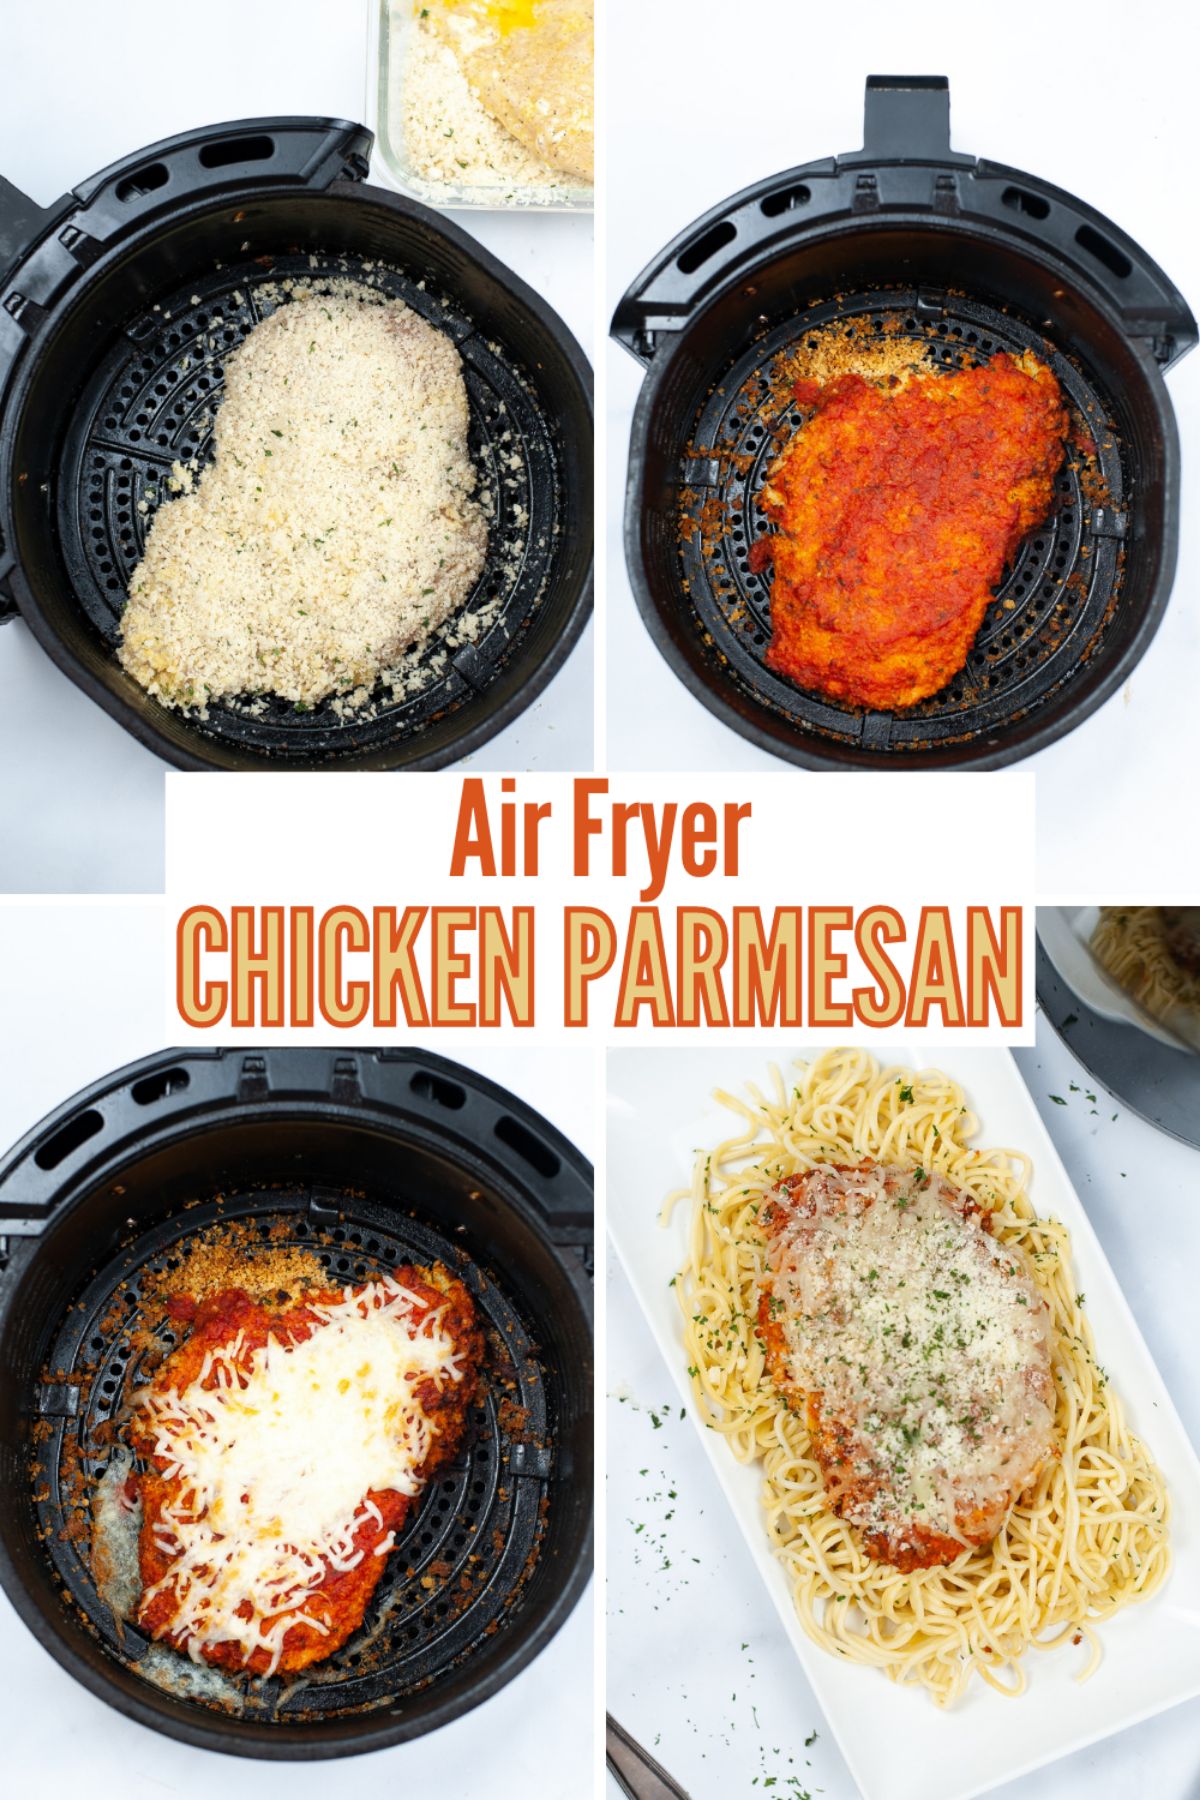 Air Fryer Parmesan Chicken is a delicious easy-to-make recipe that will leave you wanting more. It has a tasty crispy & flavorful coating. #airfryer #chickenparmesan #parmesanchicken #chicken #recipe via @wondermomwannab